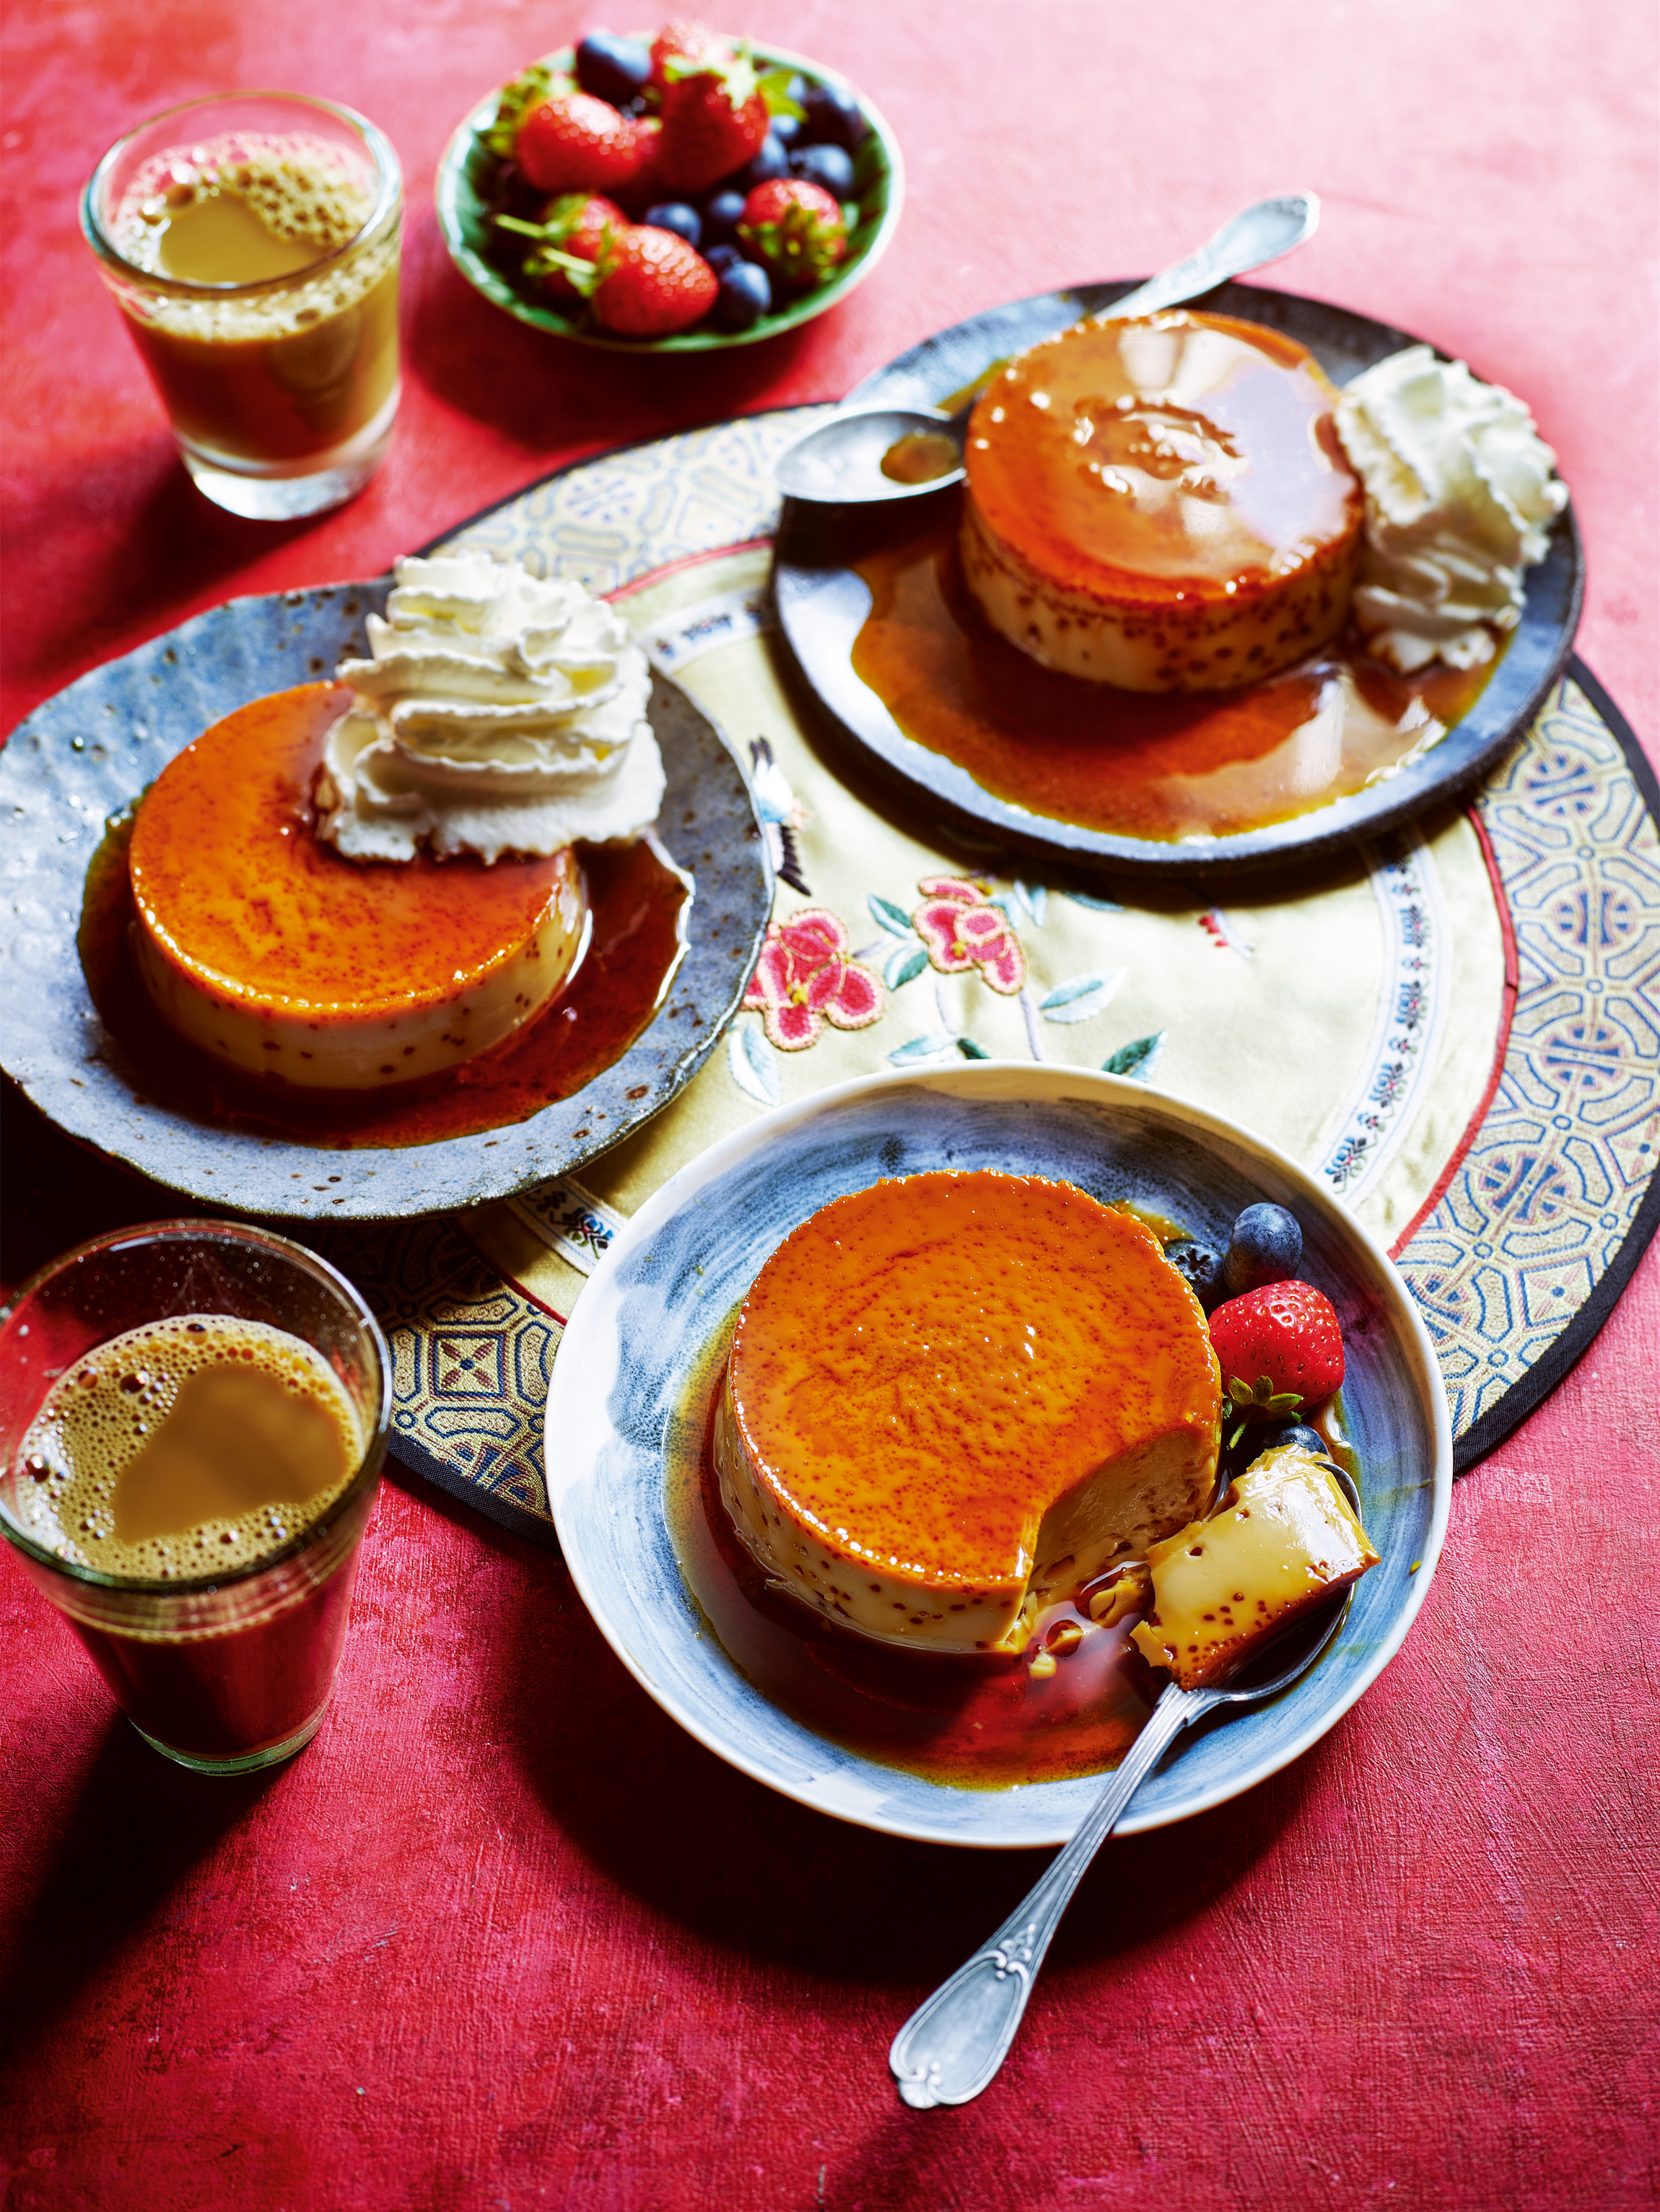 Coffee and coconut flan from Jeremy Pang's School Of Wok: Simple Family Feasts